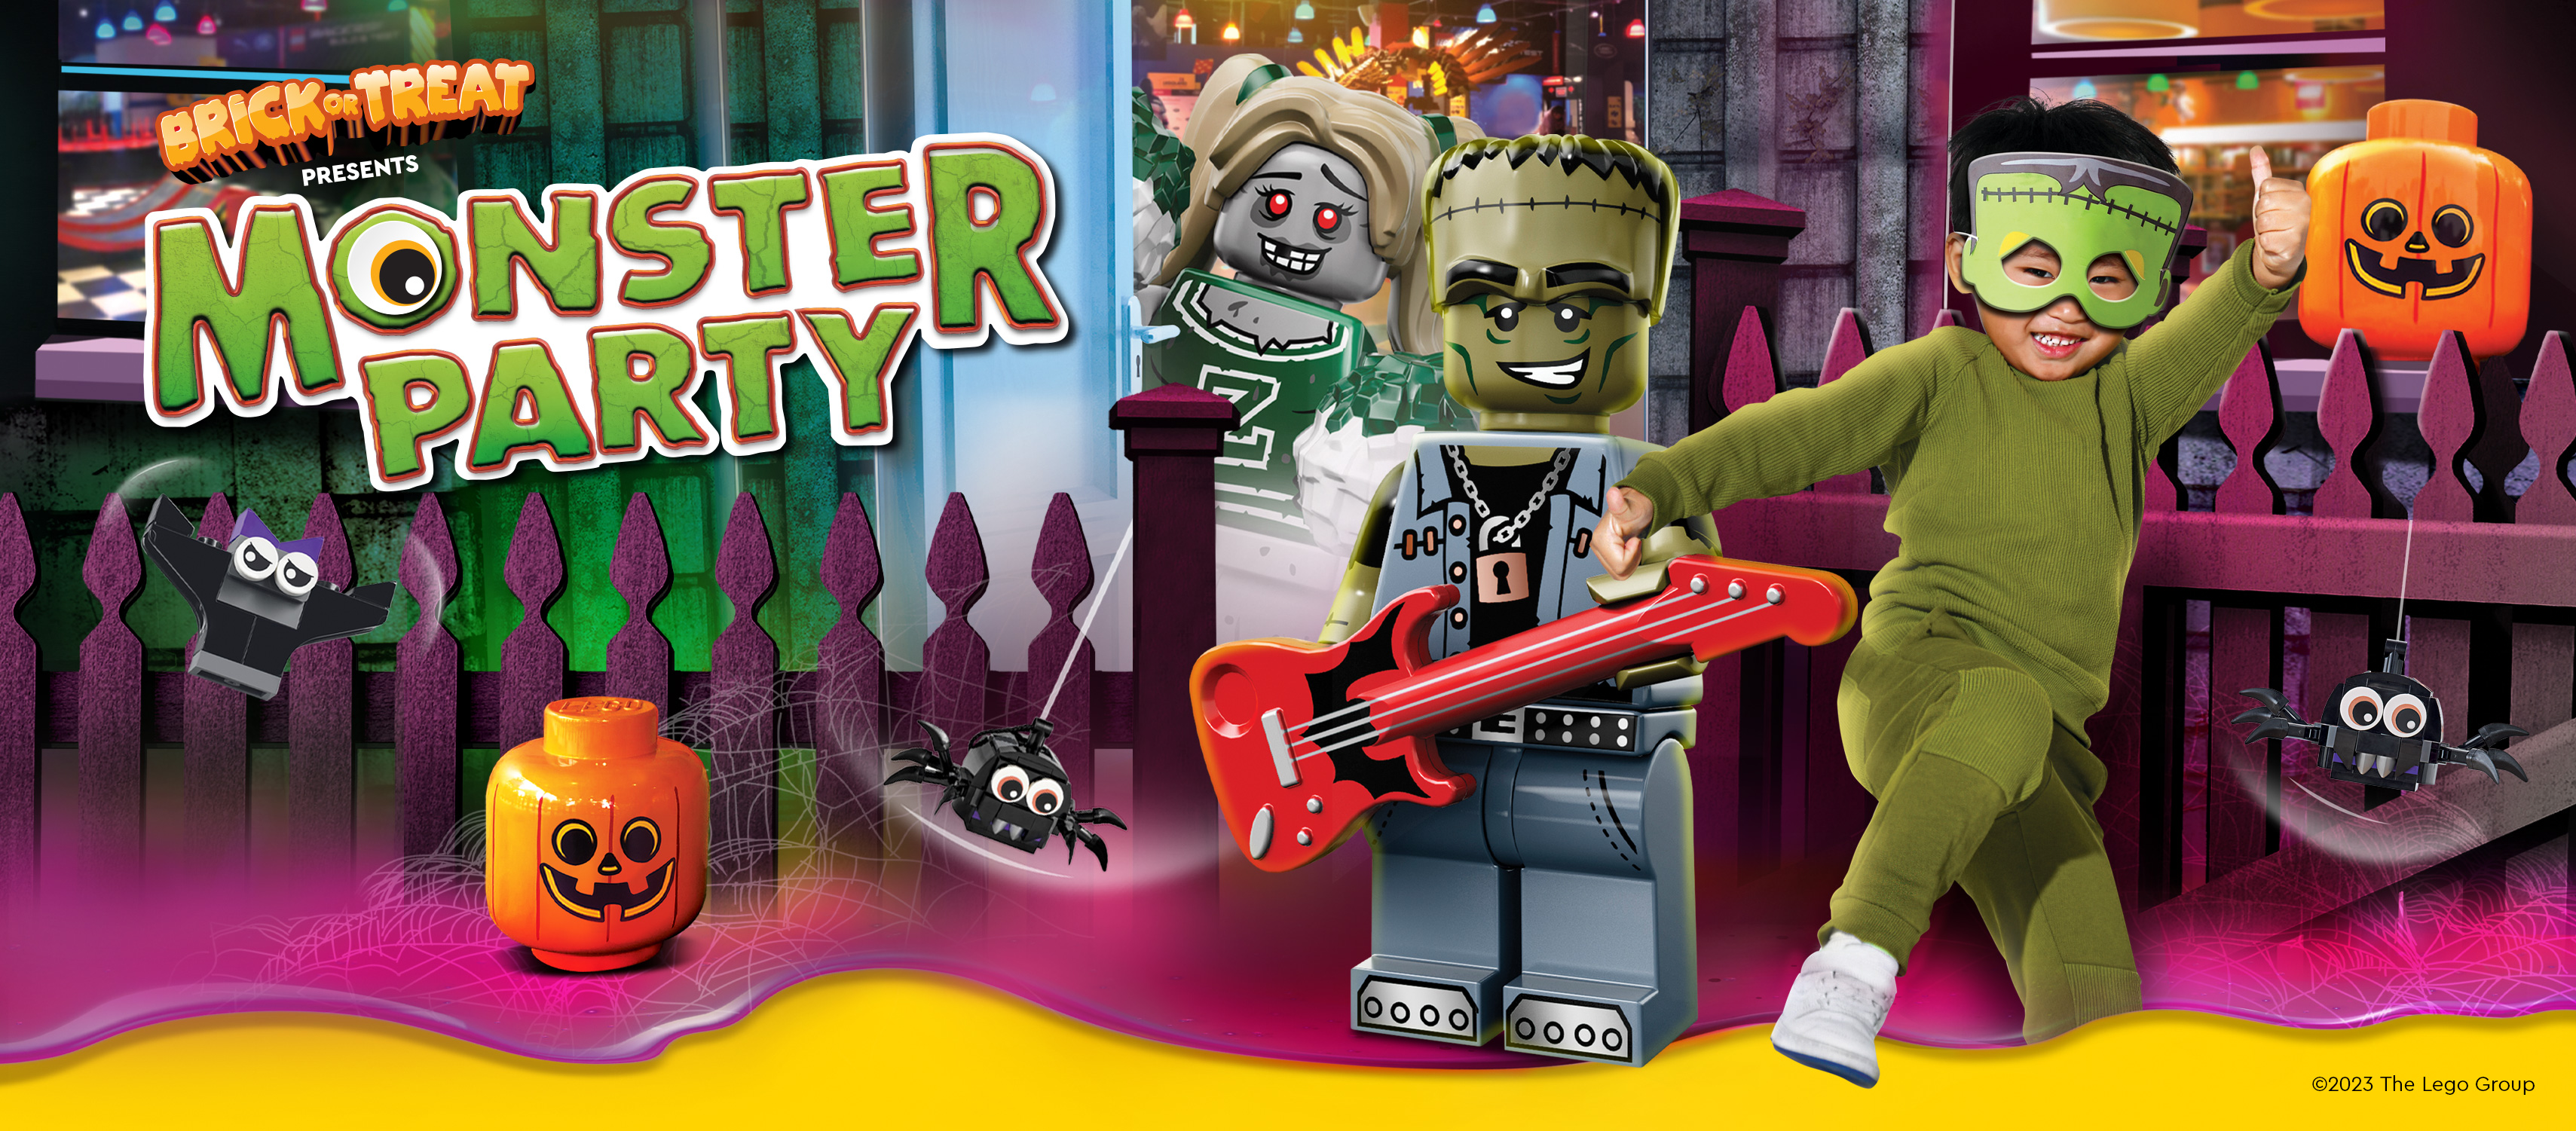 Brick or Treat - Monster Party